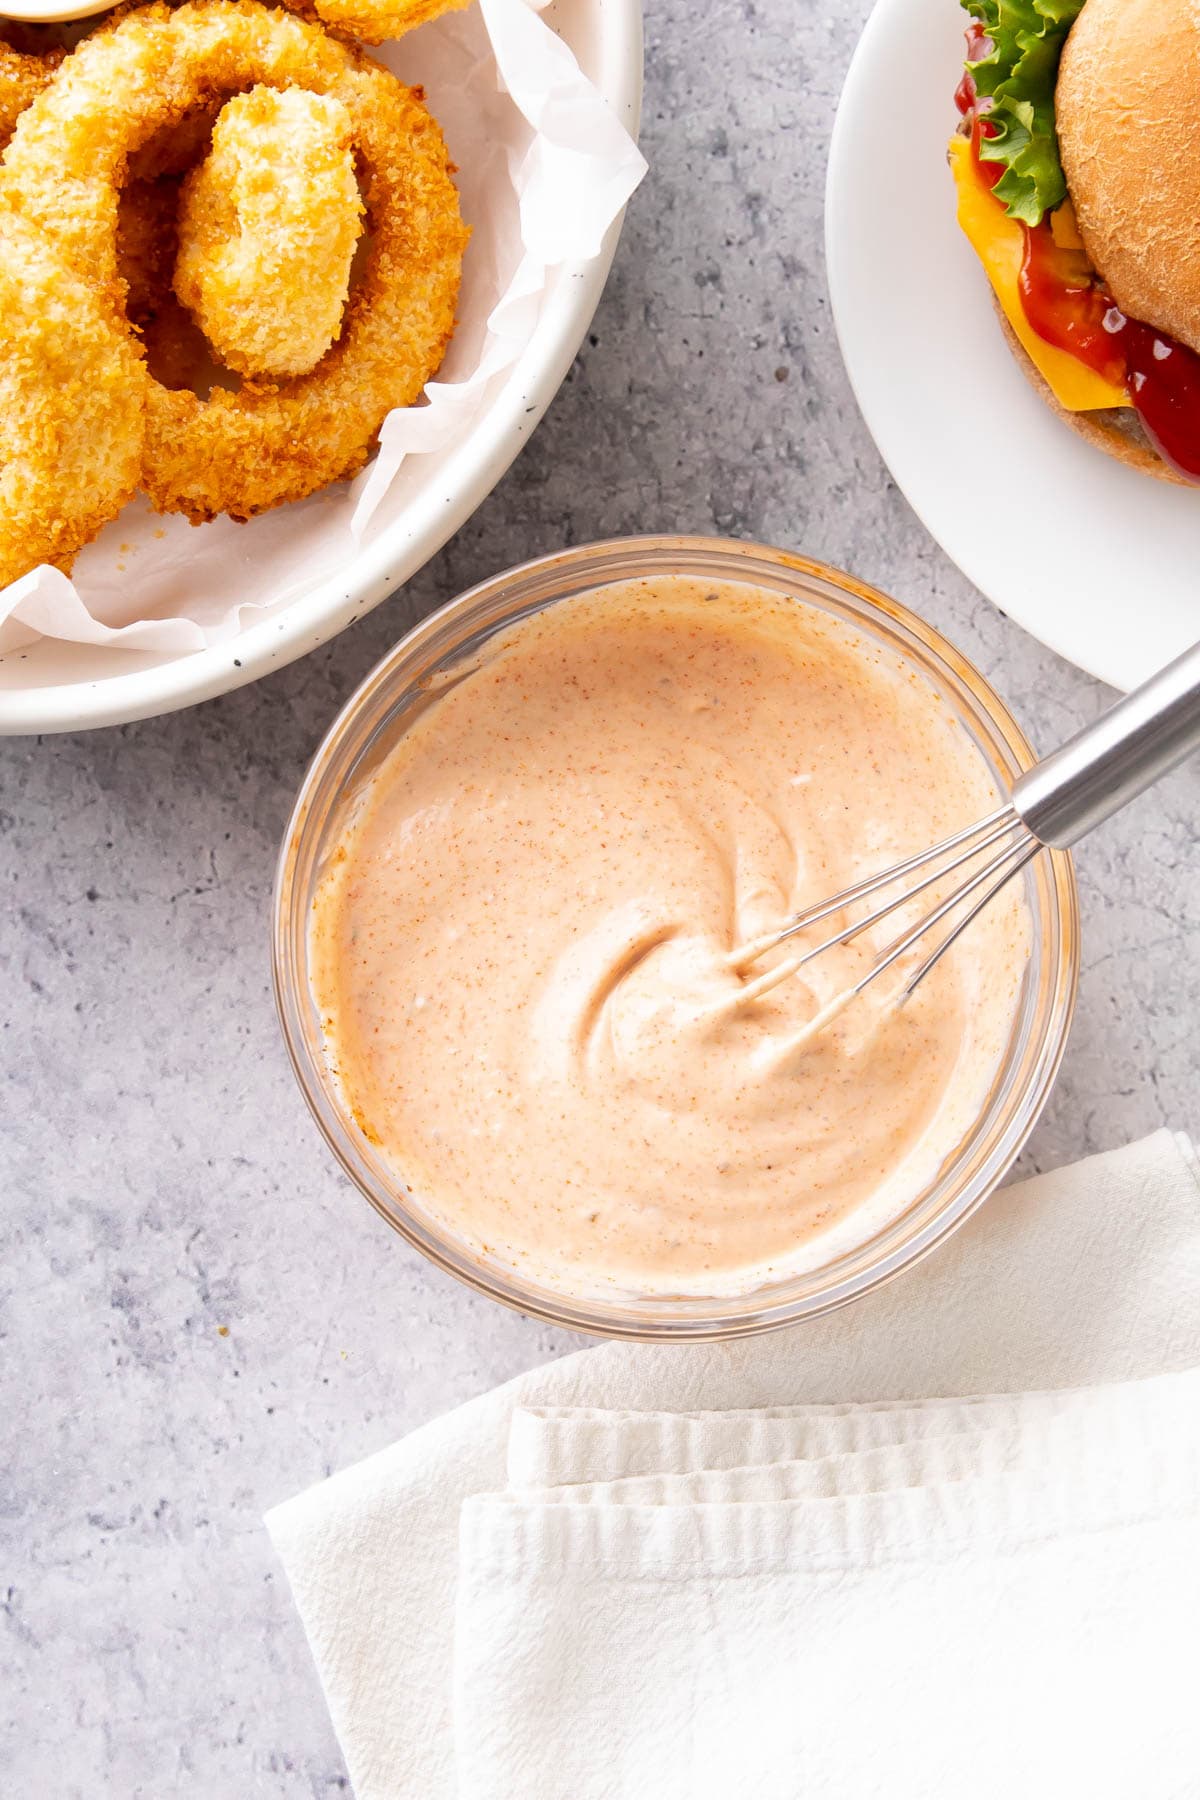 Creamy, thick homemade dip in a glass bowl with a whisk in it, served with sides and a burger